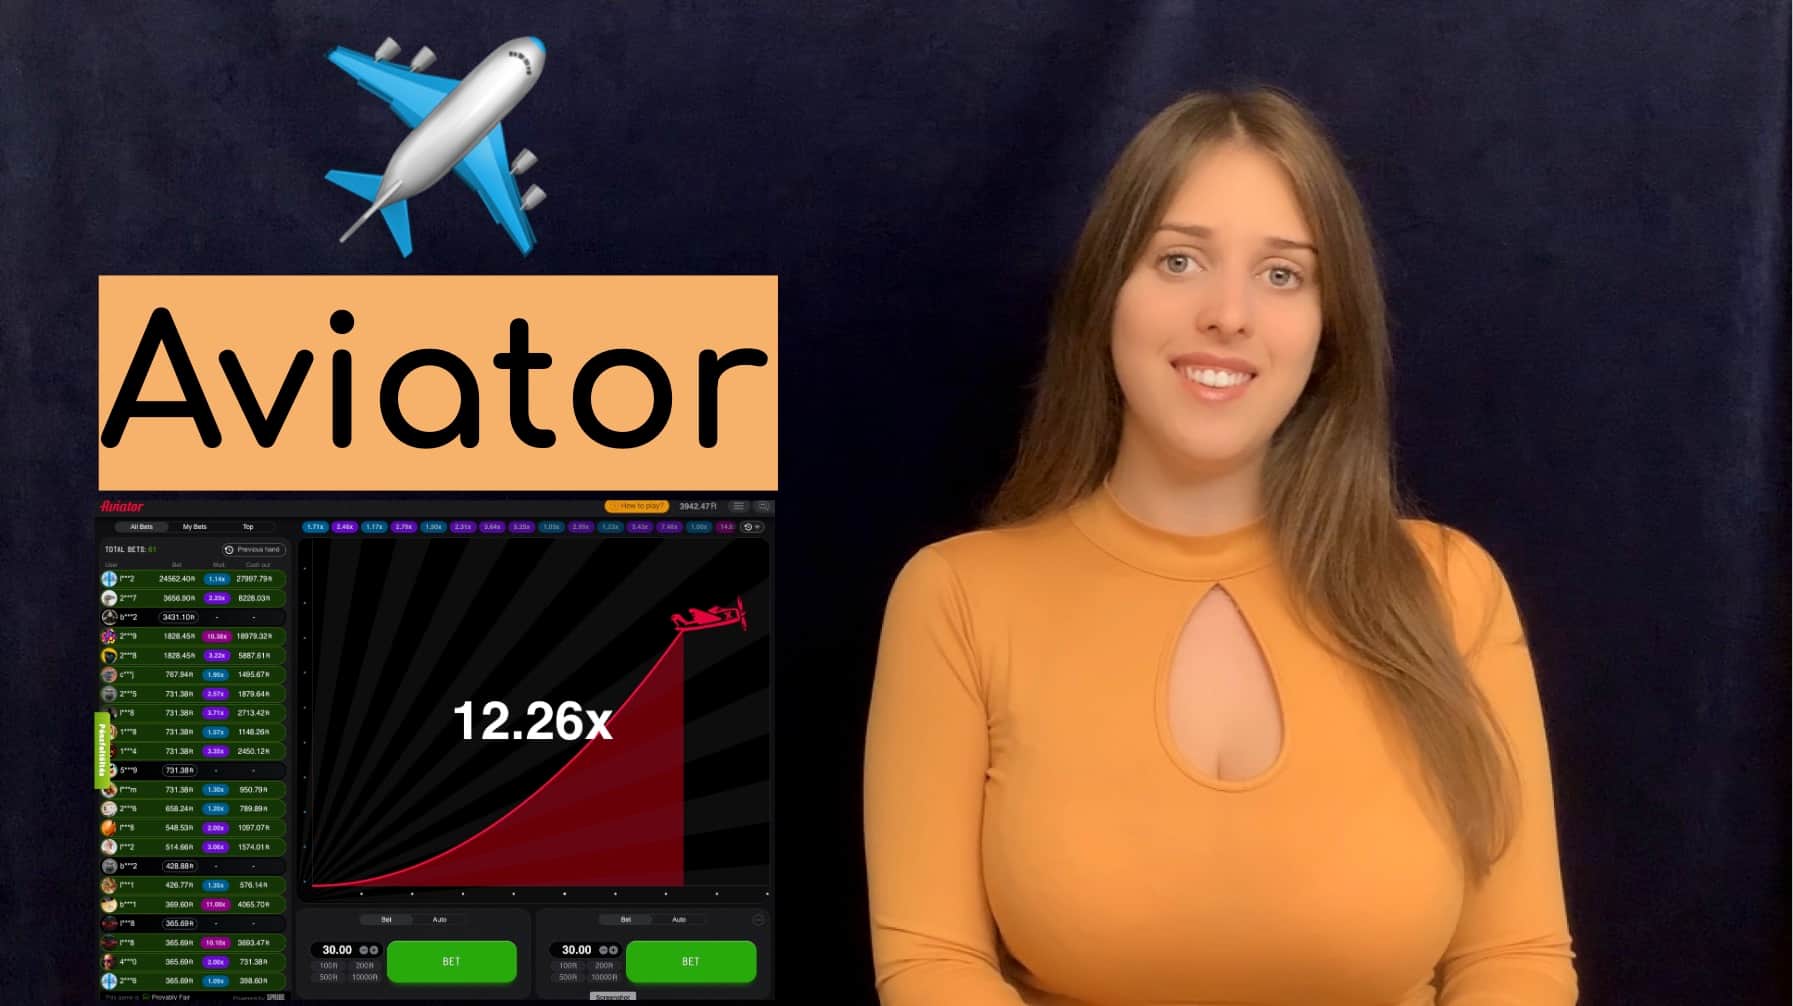 How to play the Aviator game